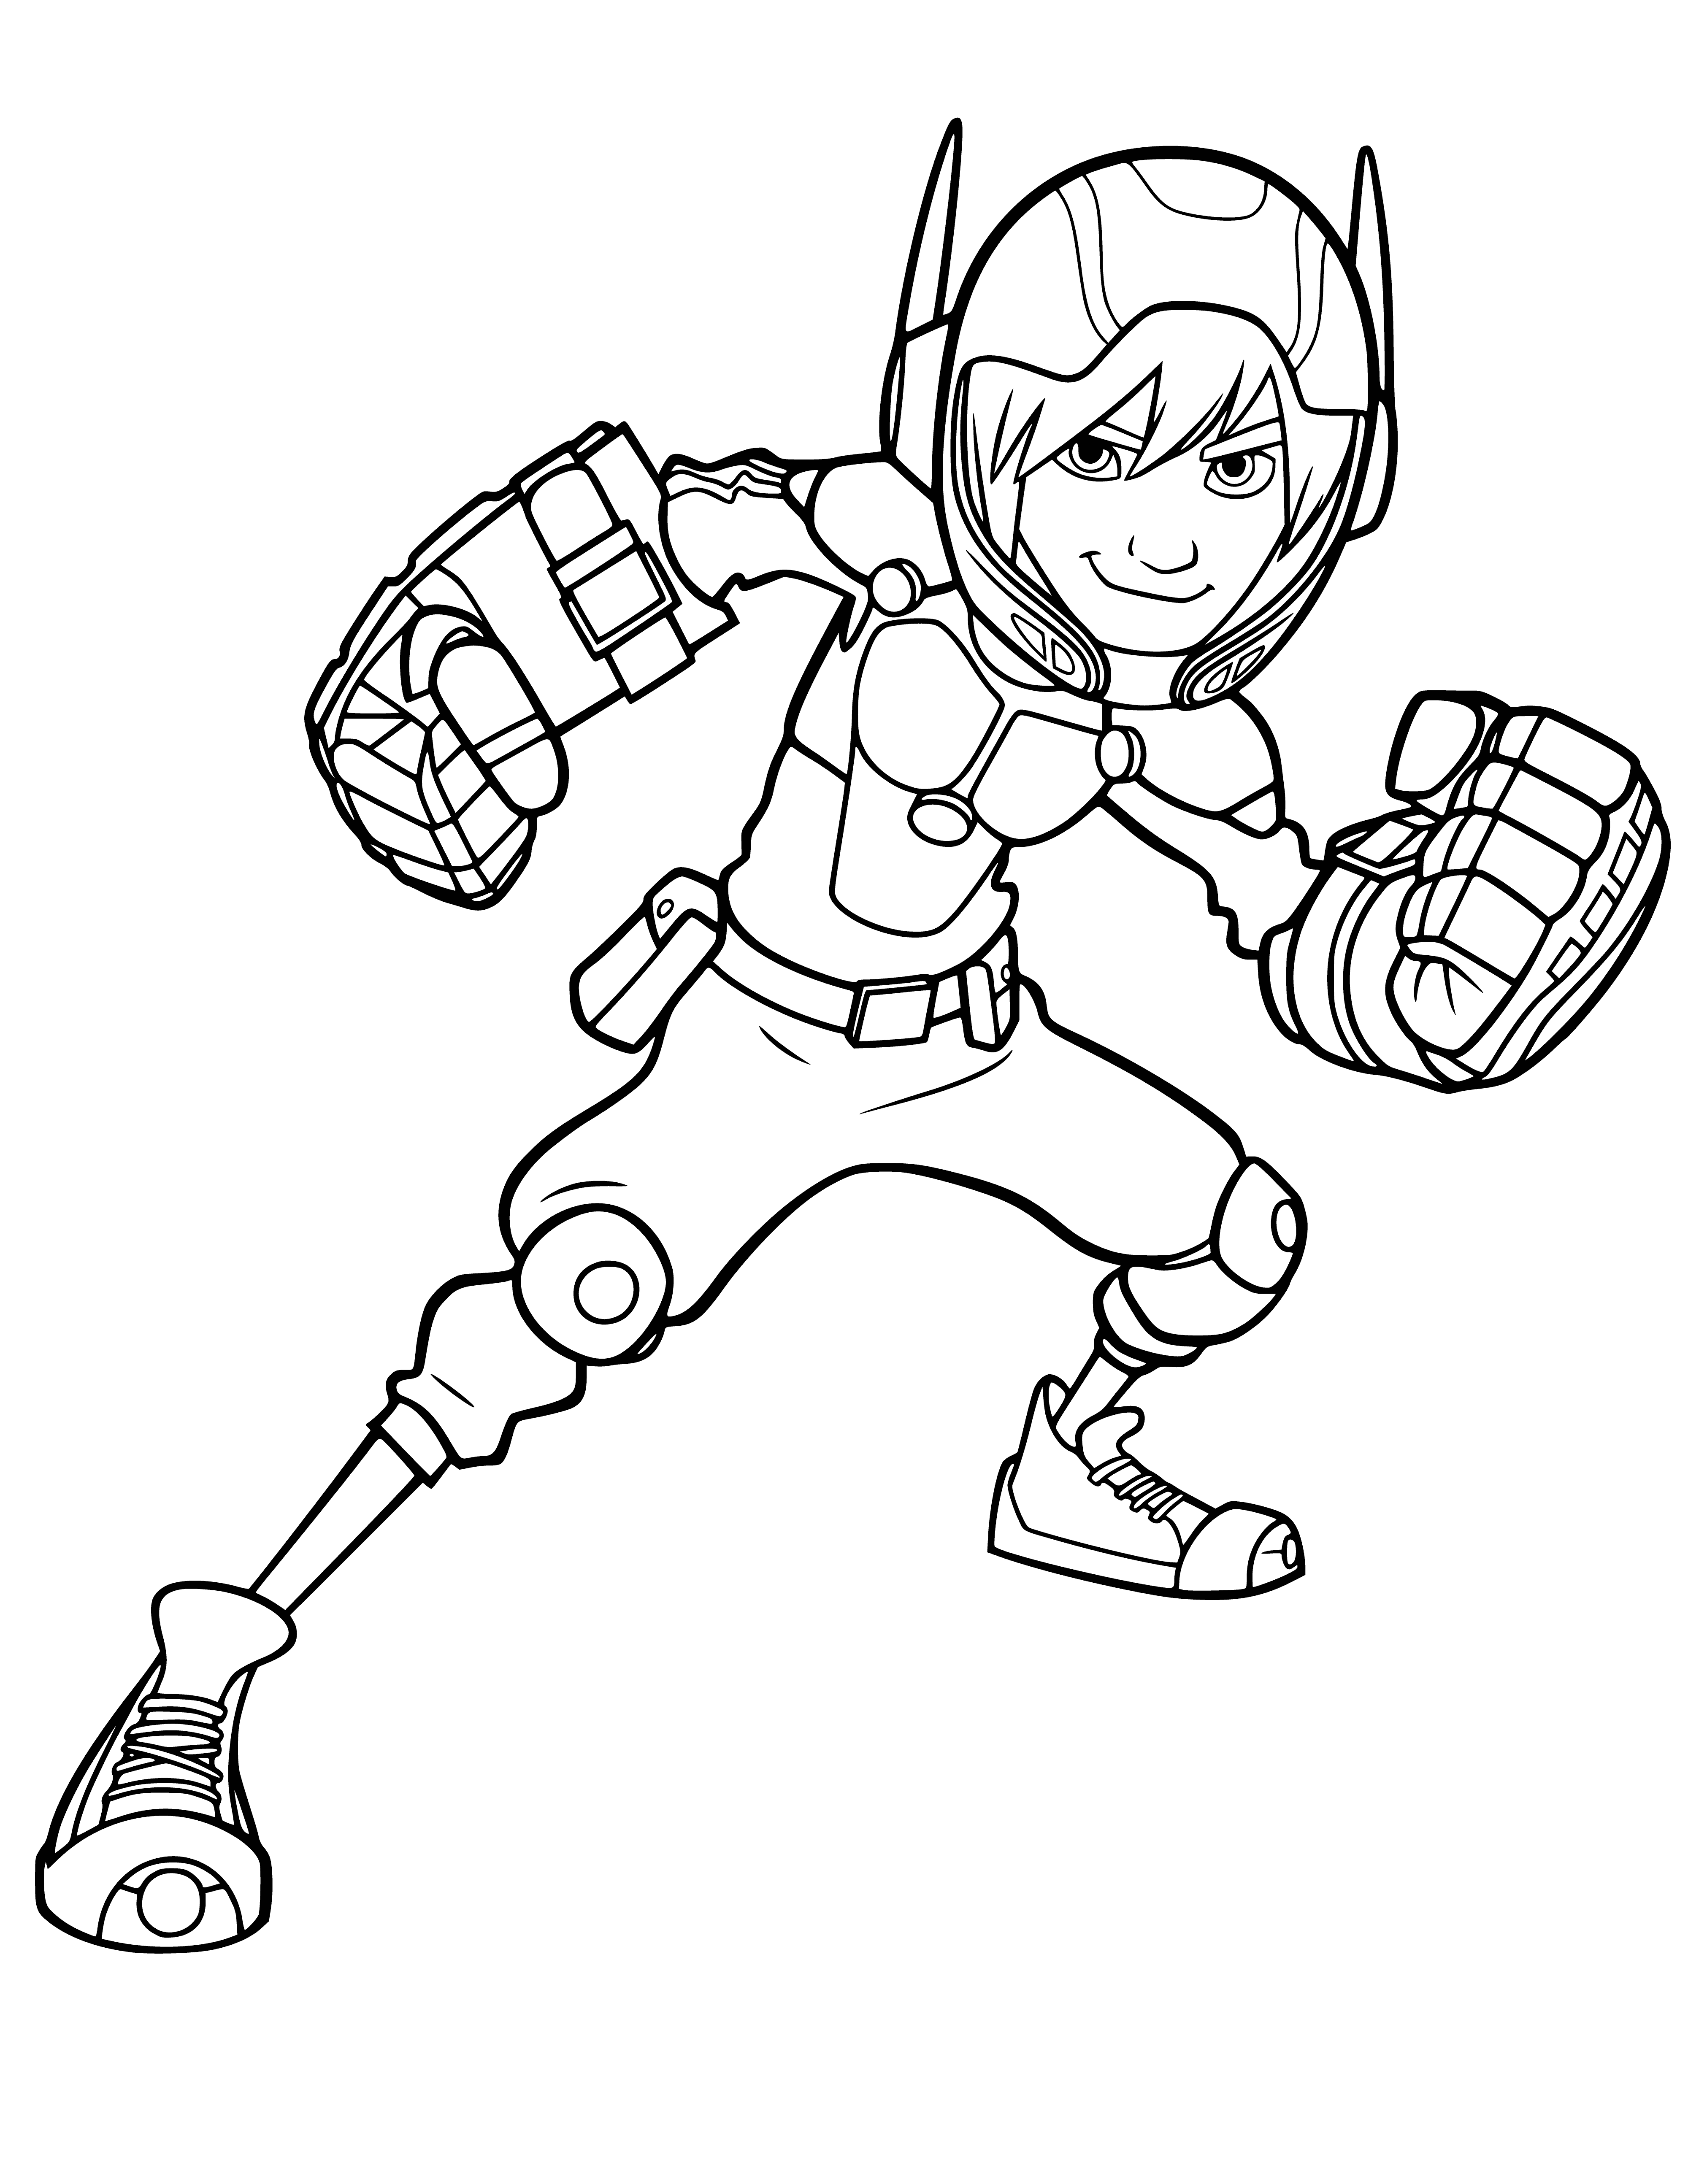 coloring page: Young boy with red/white hoodie and yellow '6' holds a large silver robot and has a black mask on his face.